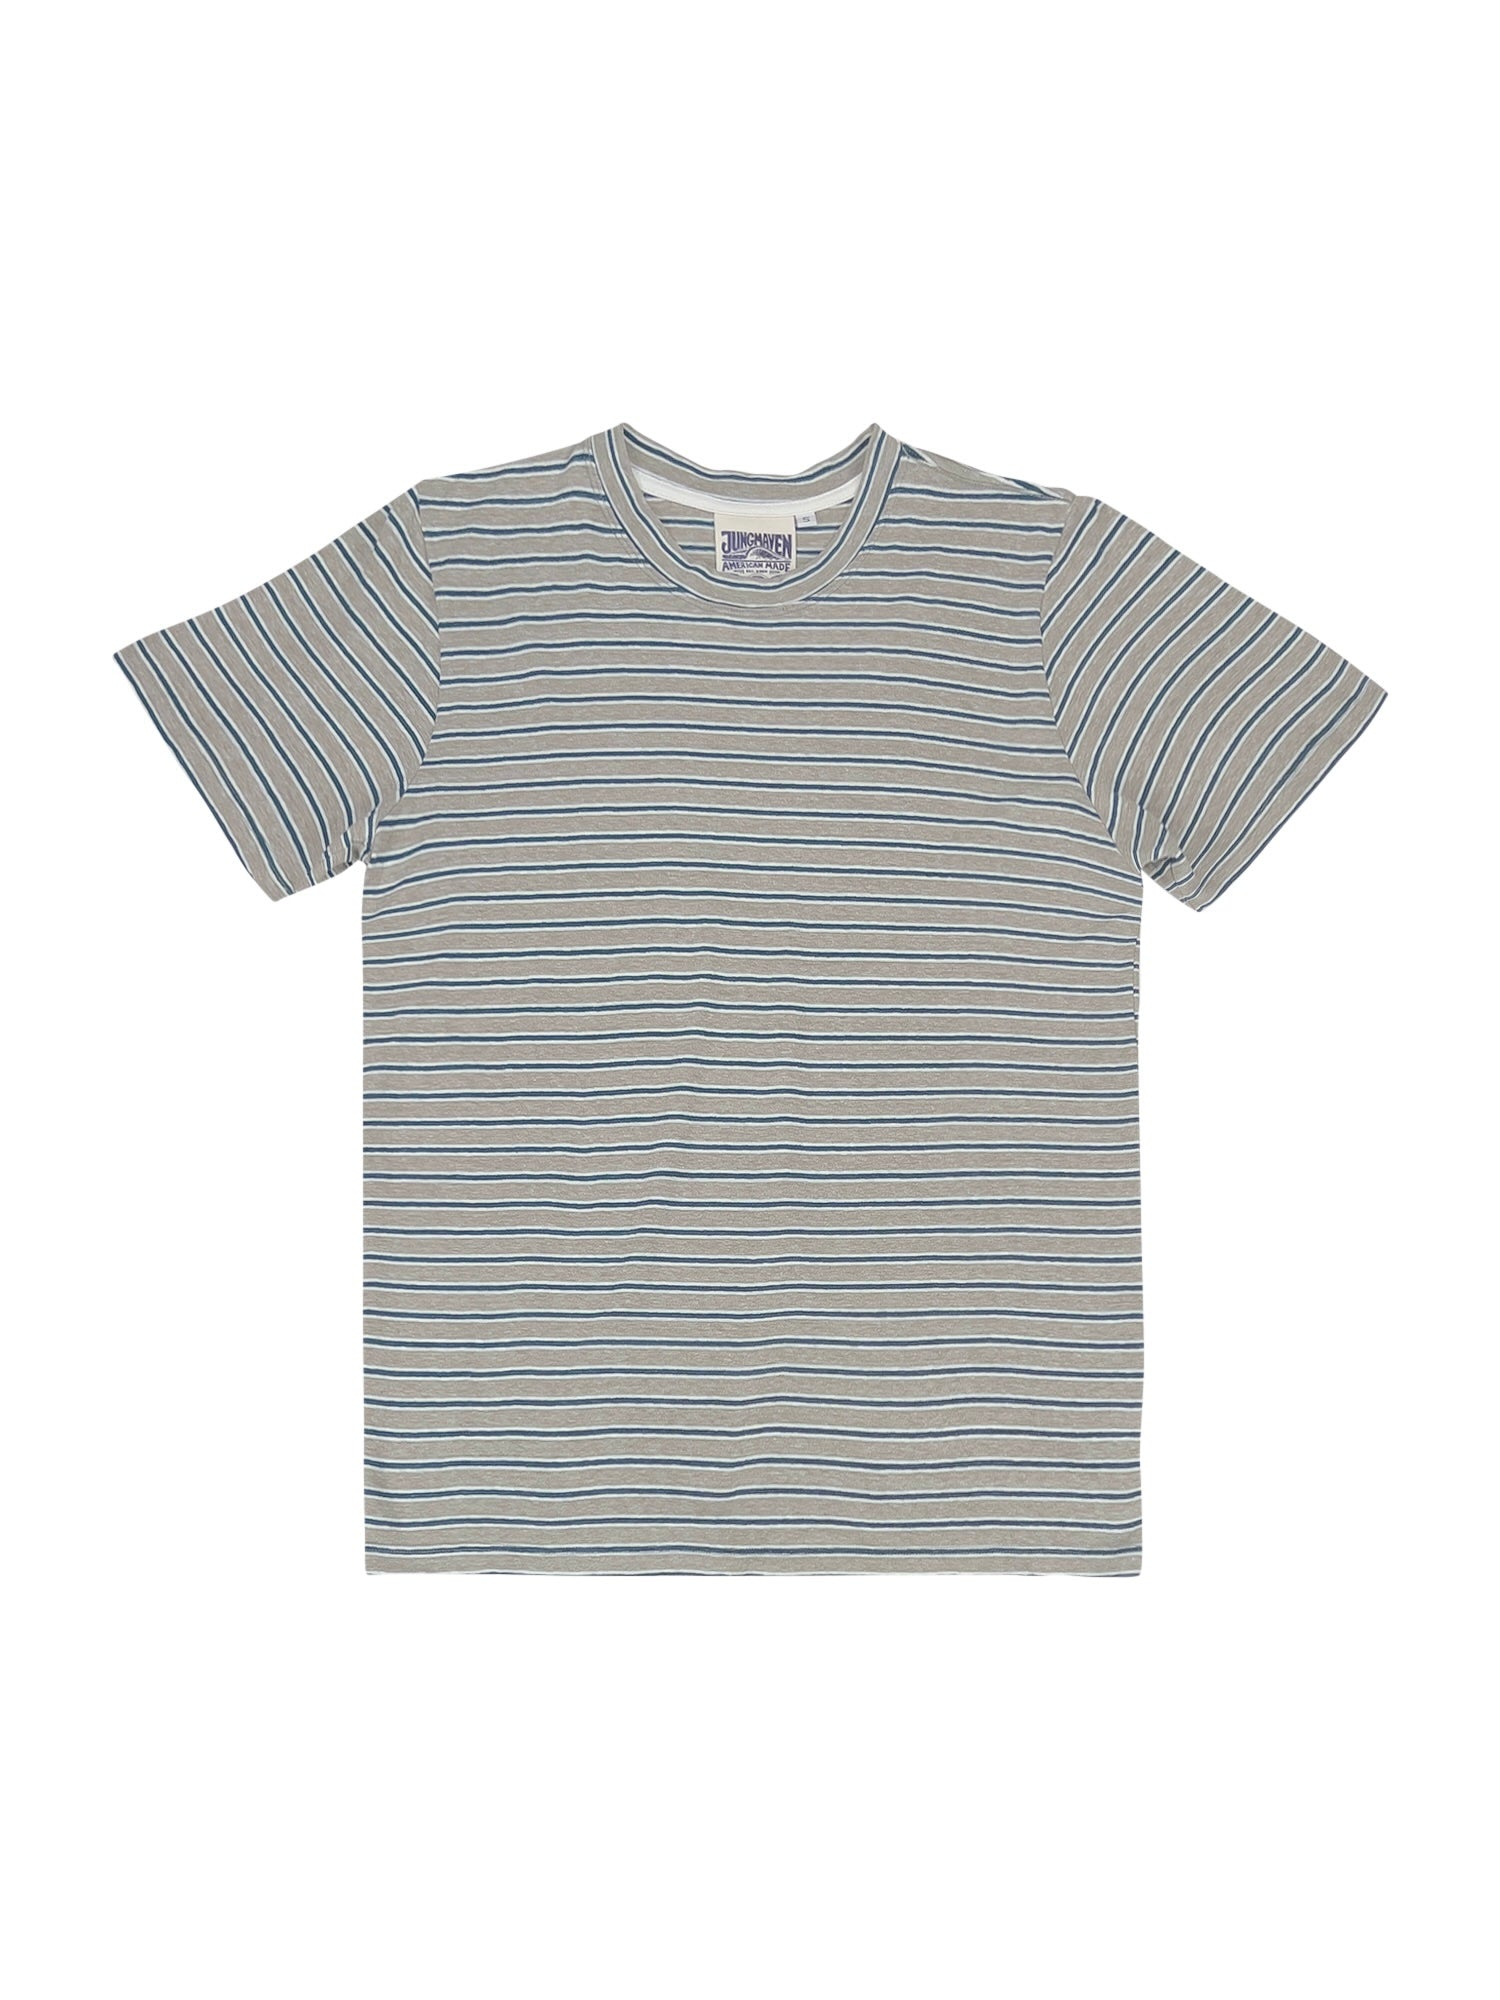 Stripe Jung Tee | Jungmaven Hemp Clothing & Accessories / Color: Teal/White/Gray Stripe